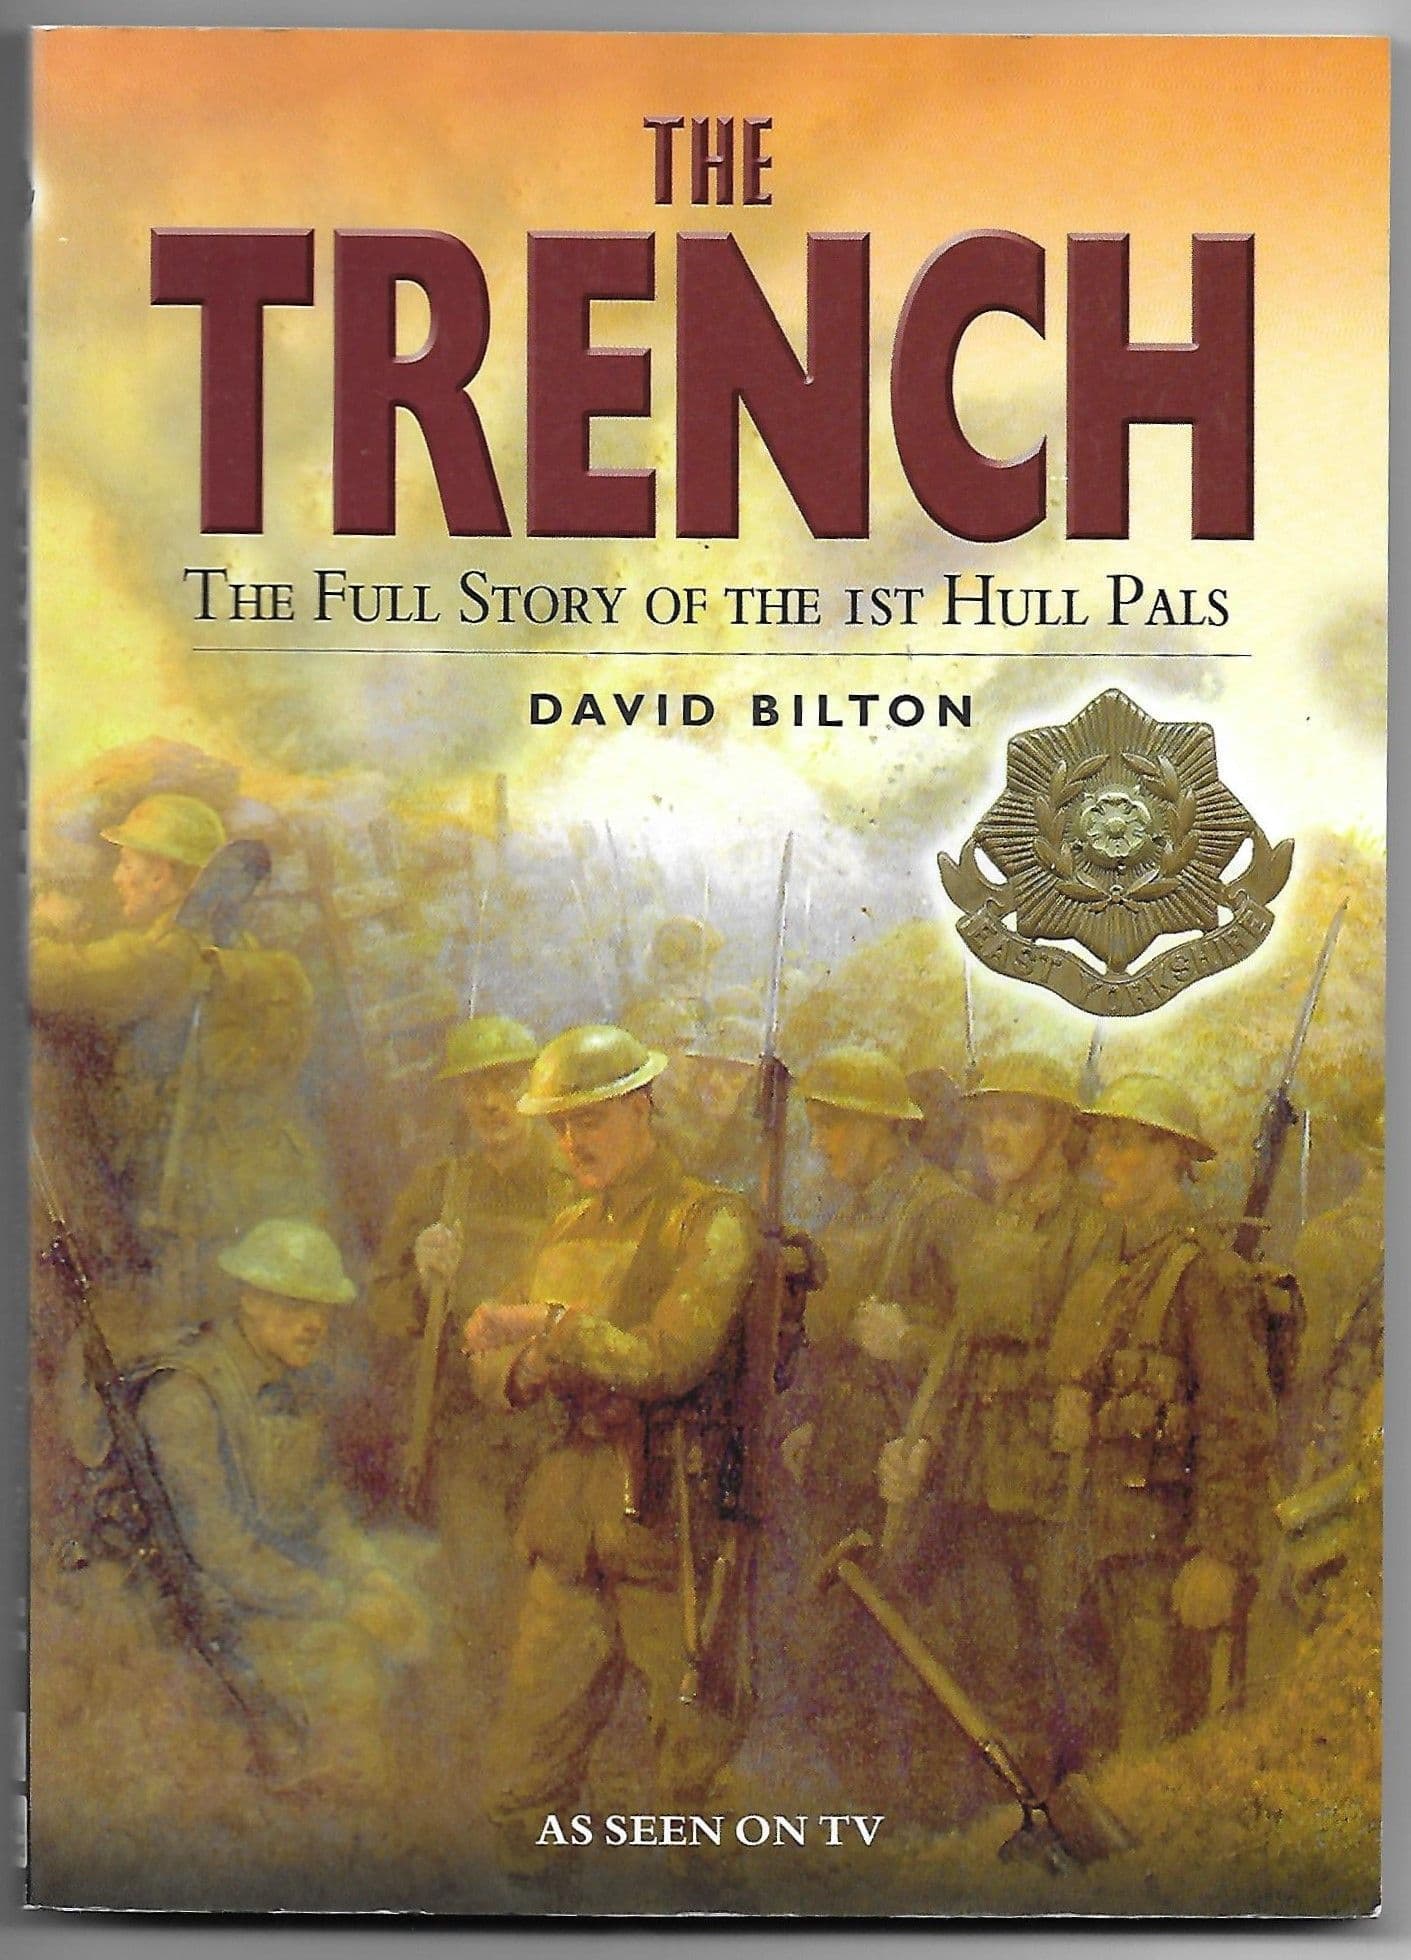 The Trench, The Full Story of the 1st Hull pals